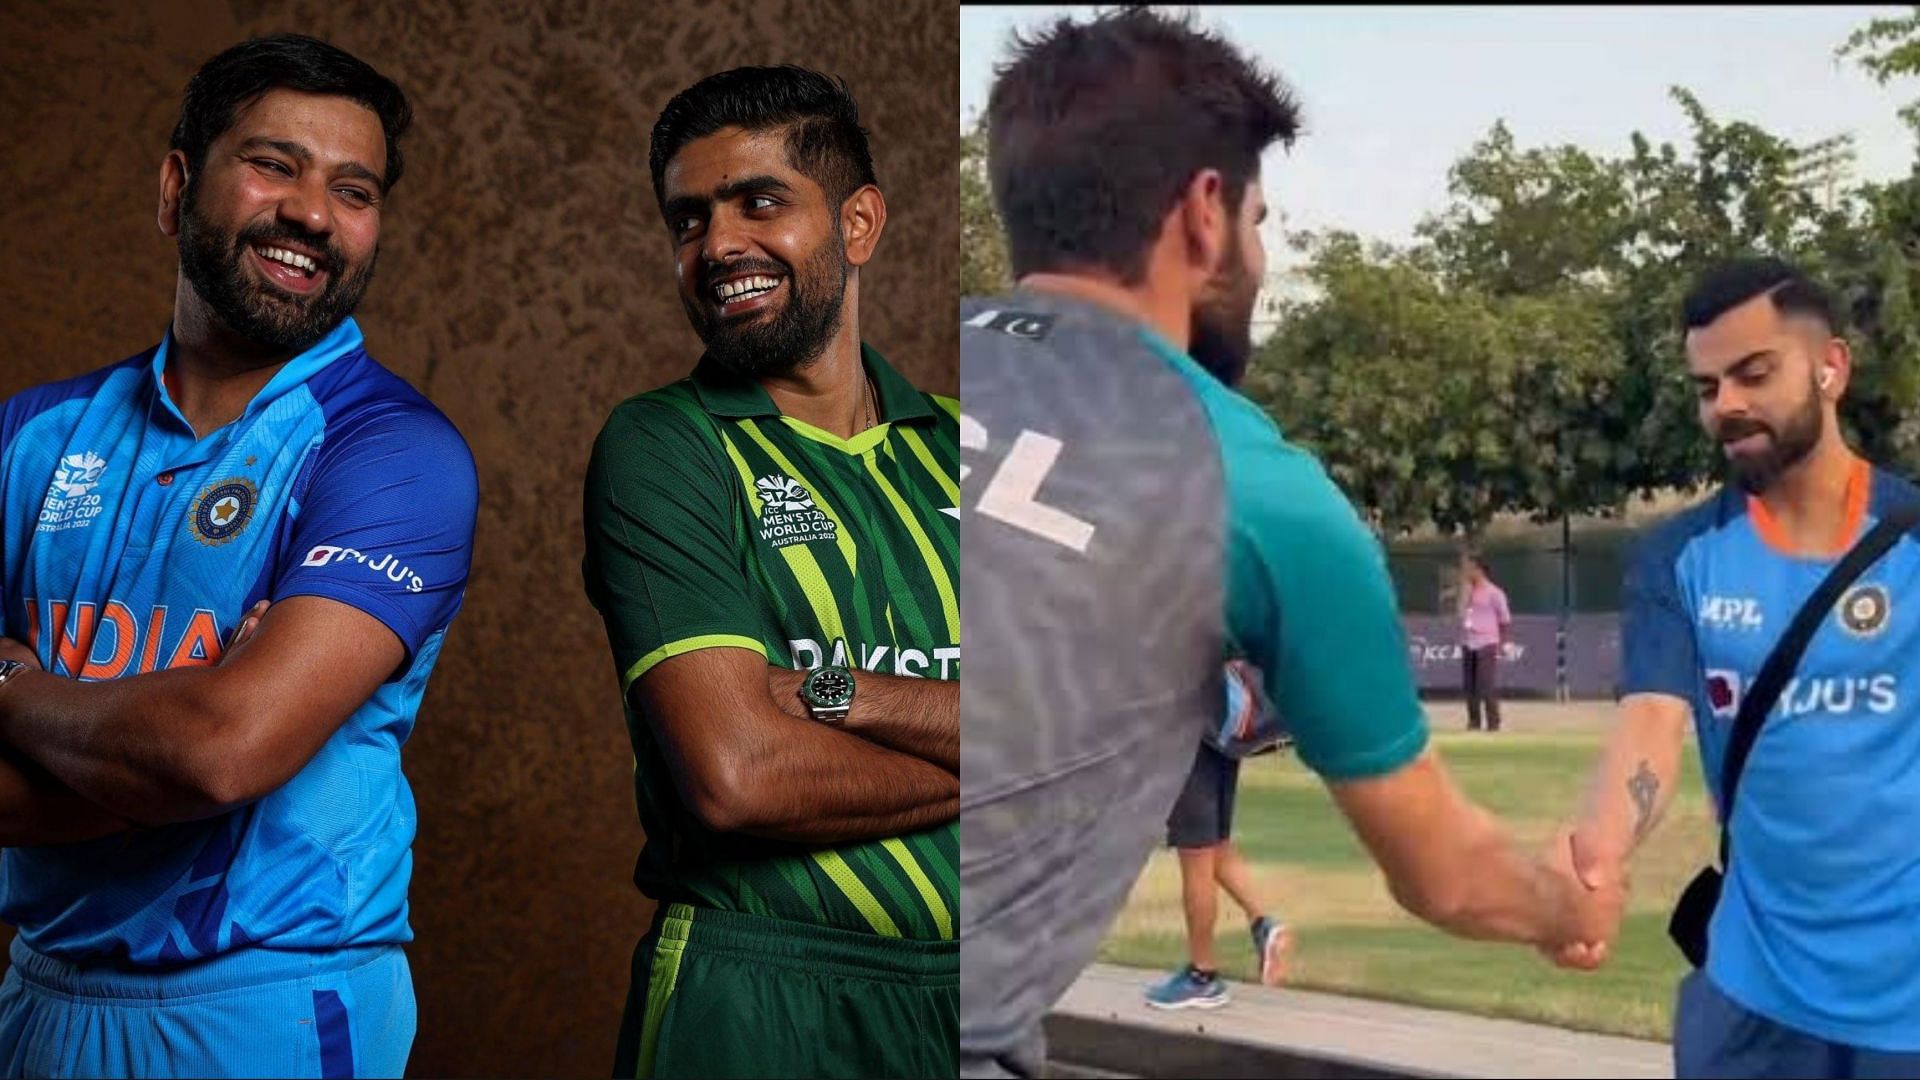 India and Pakistan cricketers seem to have a good friendship (Image: Twitter)